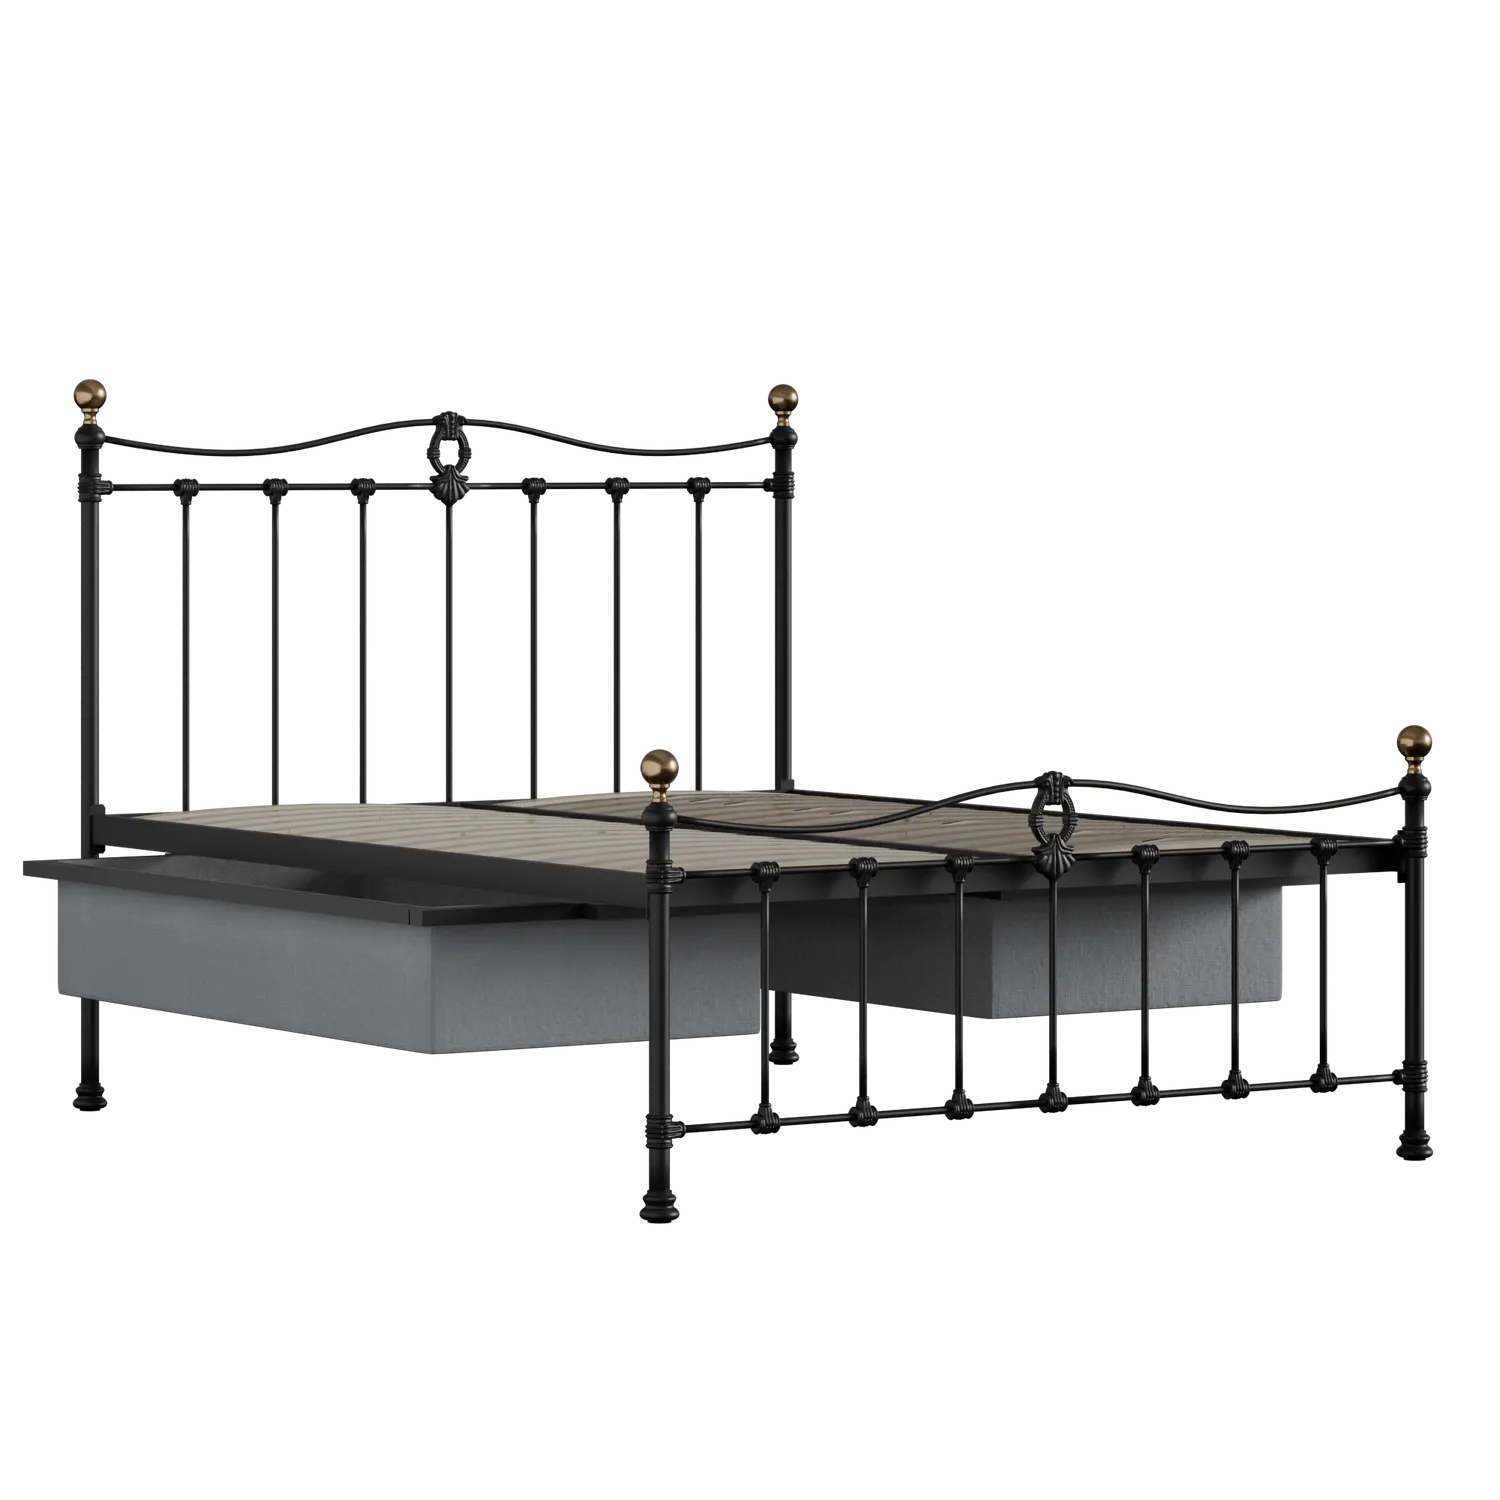 Tulsk Low Footend iron/metal bed in black with drawers